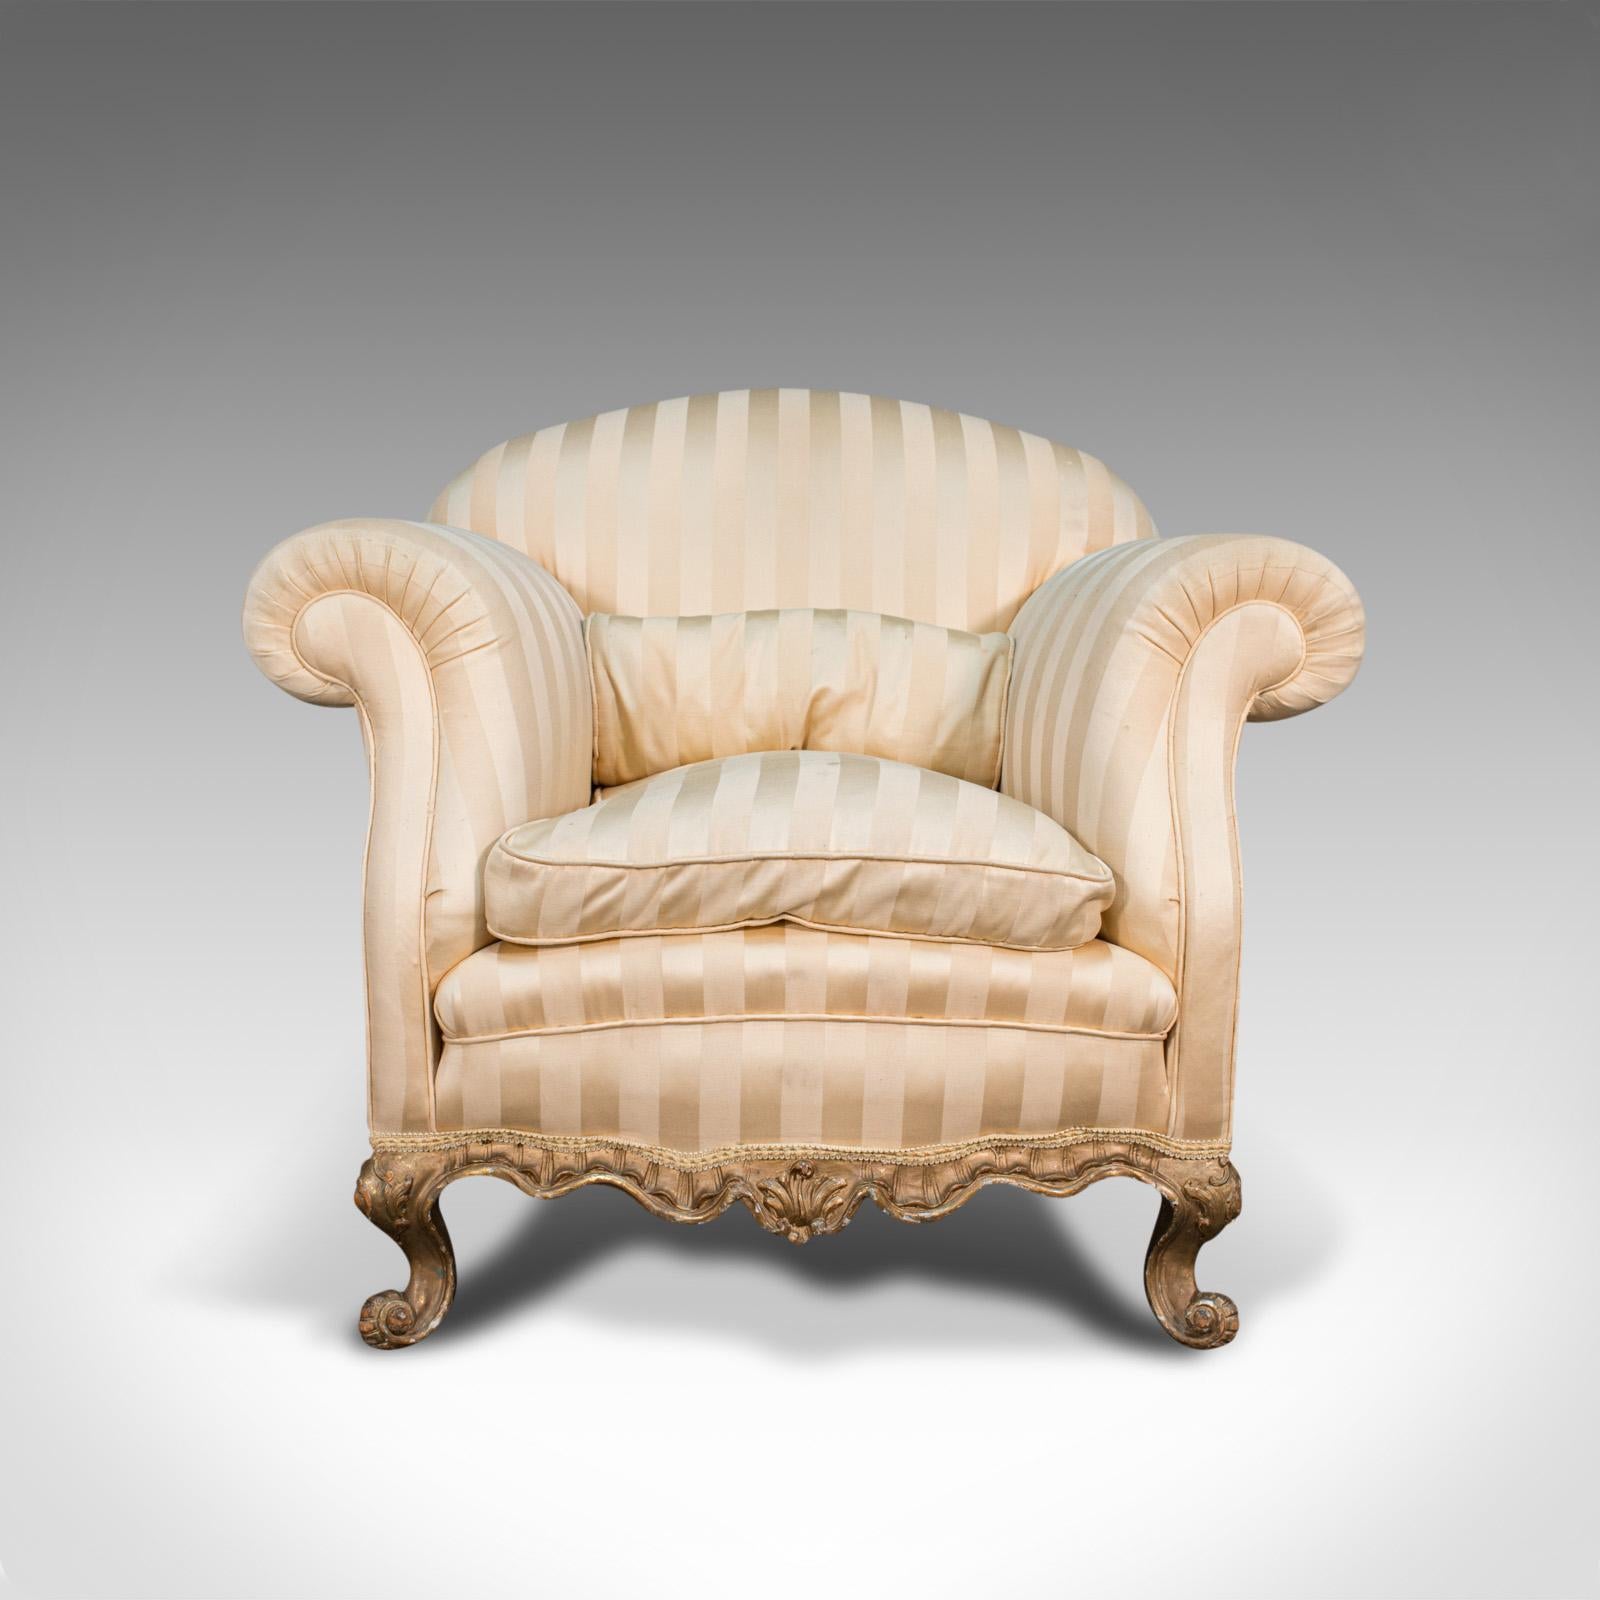 This is an antique lounge armchair. A French, textile and beech tub seat, dating to the late Victorian period, circa 1900.

Offers lasting antique elegance for the living room
Displaying a desirable aged patina - ready to be enjoyed as is or